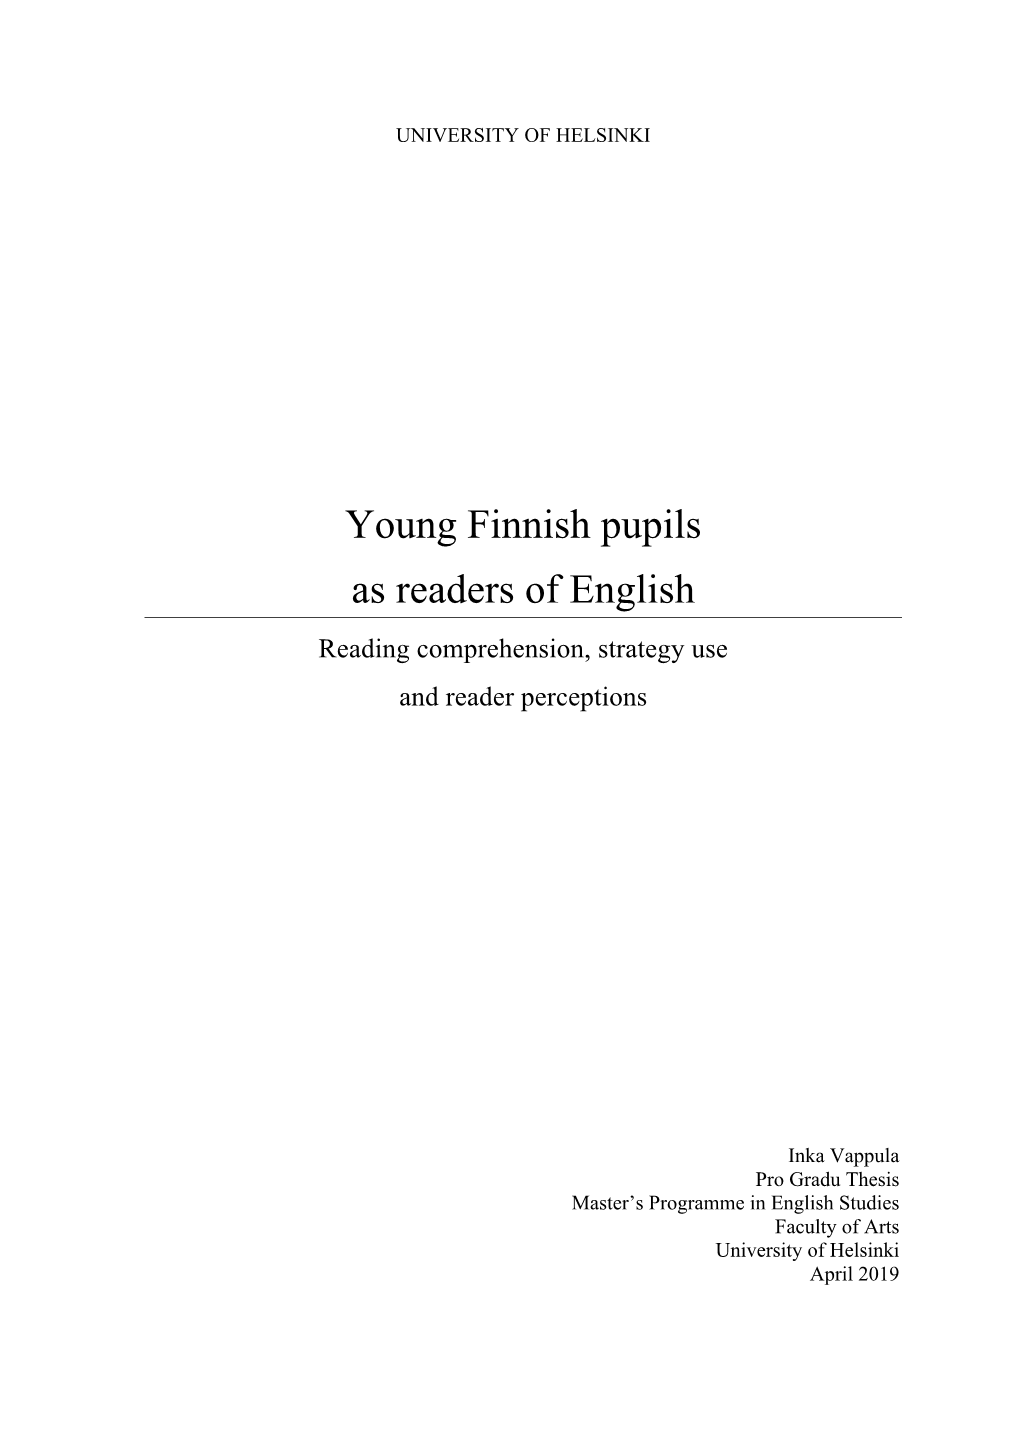 Young Finnish Pupils As Readers of English Reading Comprehension, Strategy Use and Reader Perceptions